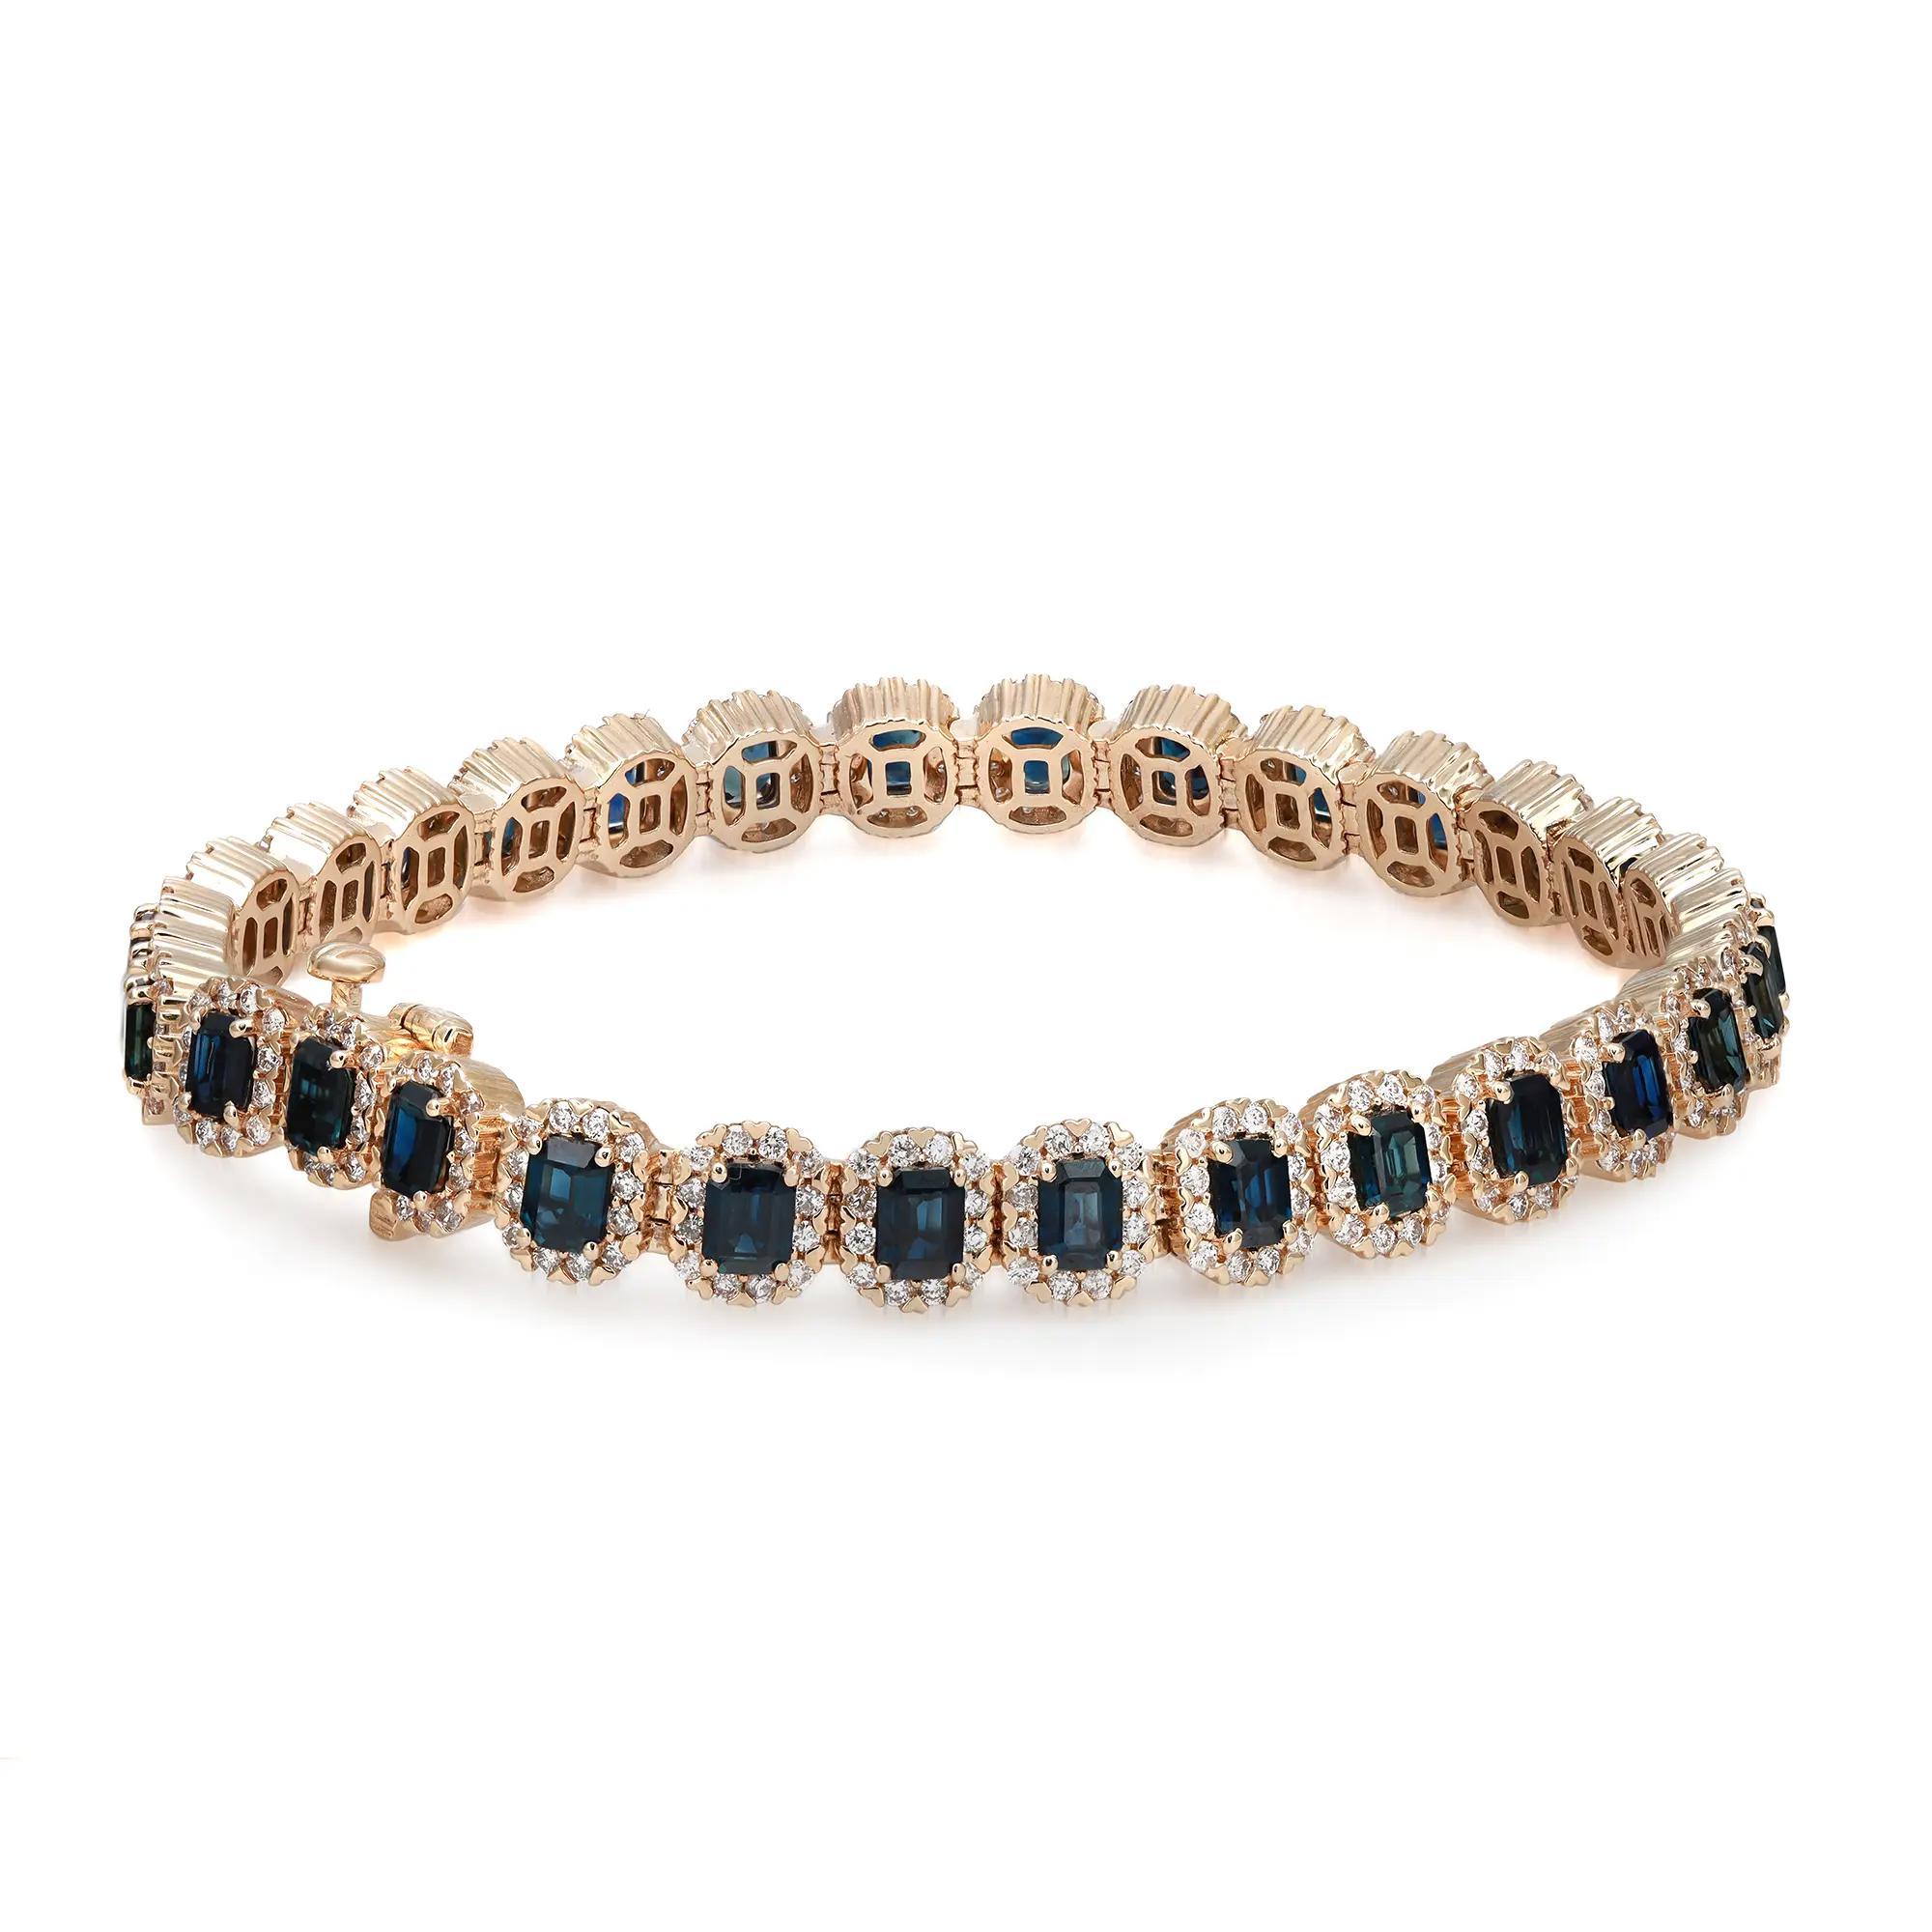 This stunning and exemplary bracelet is crafted in 14K yellow gold. Starring 31 radiant prong set emerald cut blue sapphire, set with a halo of bright white round cut diamonds. Total diamond weight: 2.30 carats. Diamond quality: H-I and clarity SI.